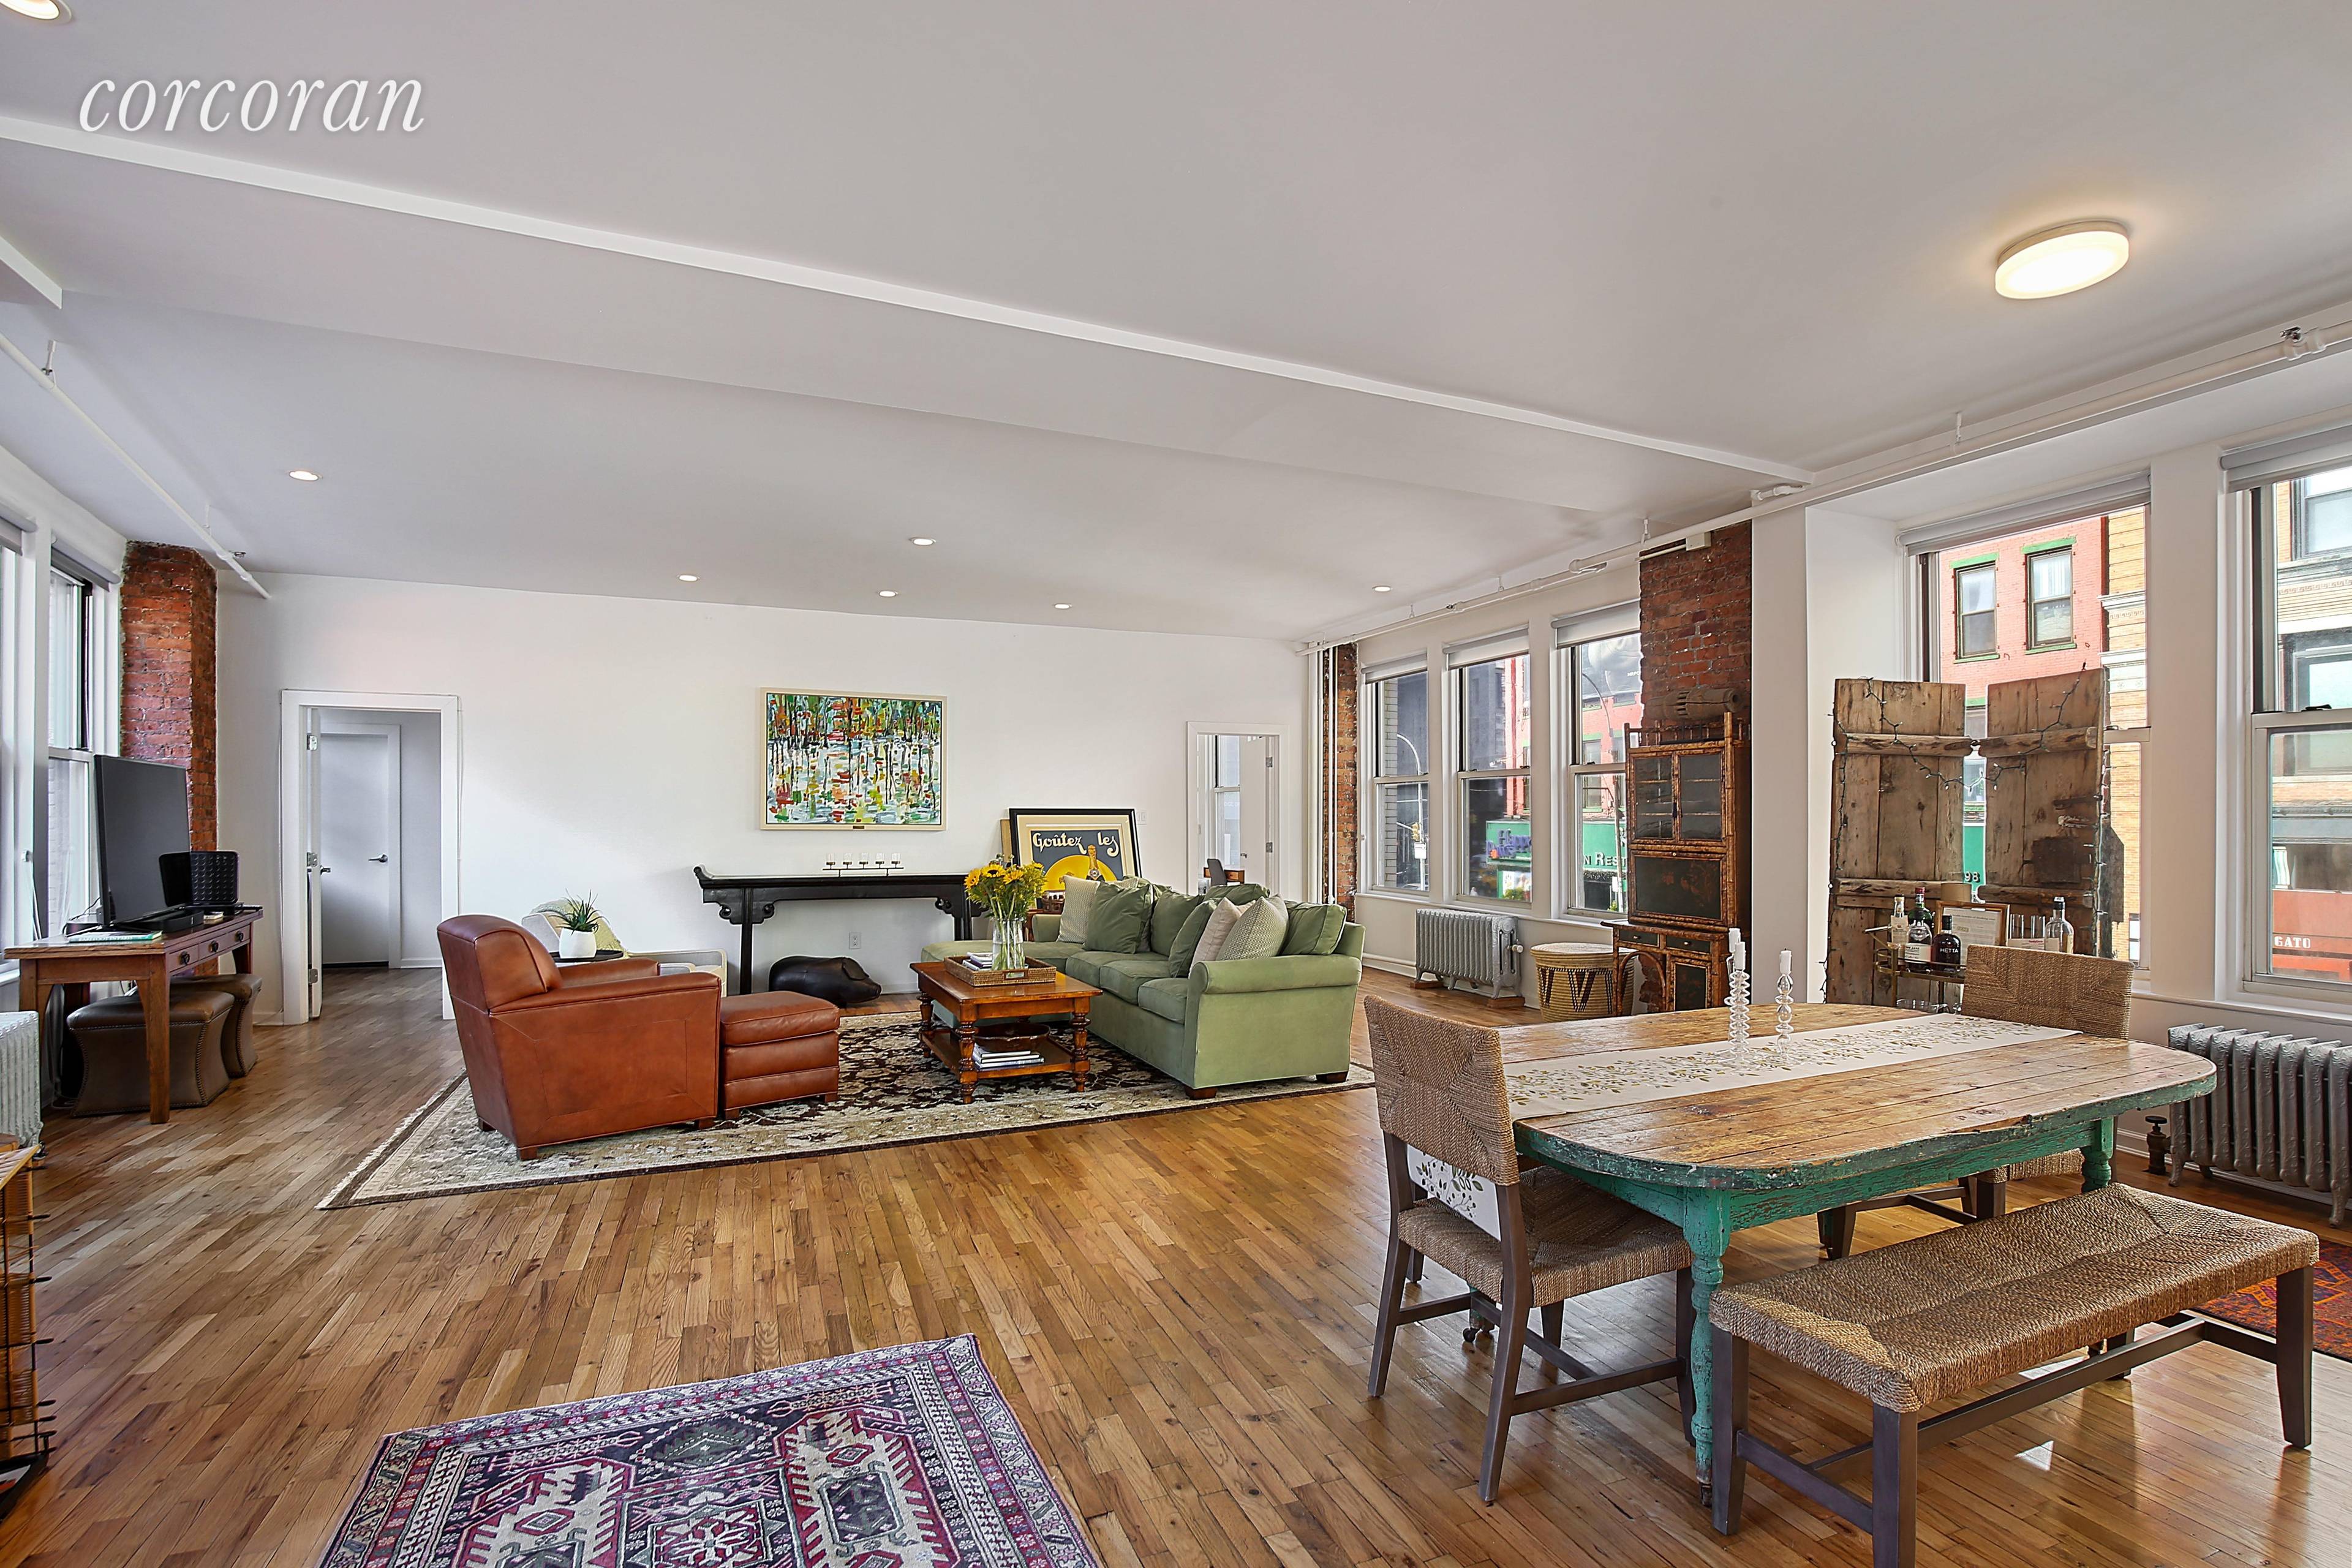 This classic 2 BED 2 BATH full floor loft in prime NOHO has a keyed elevator which opens directly into the open floor plan living space.